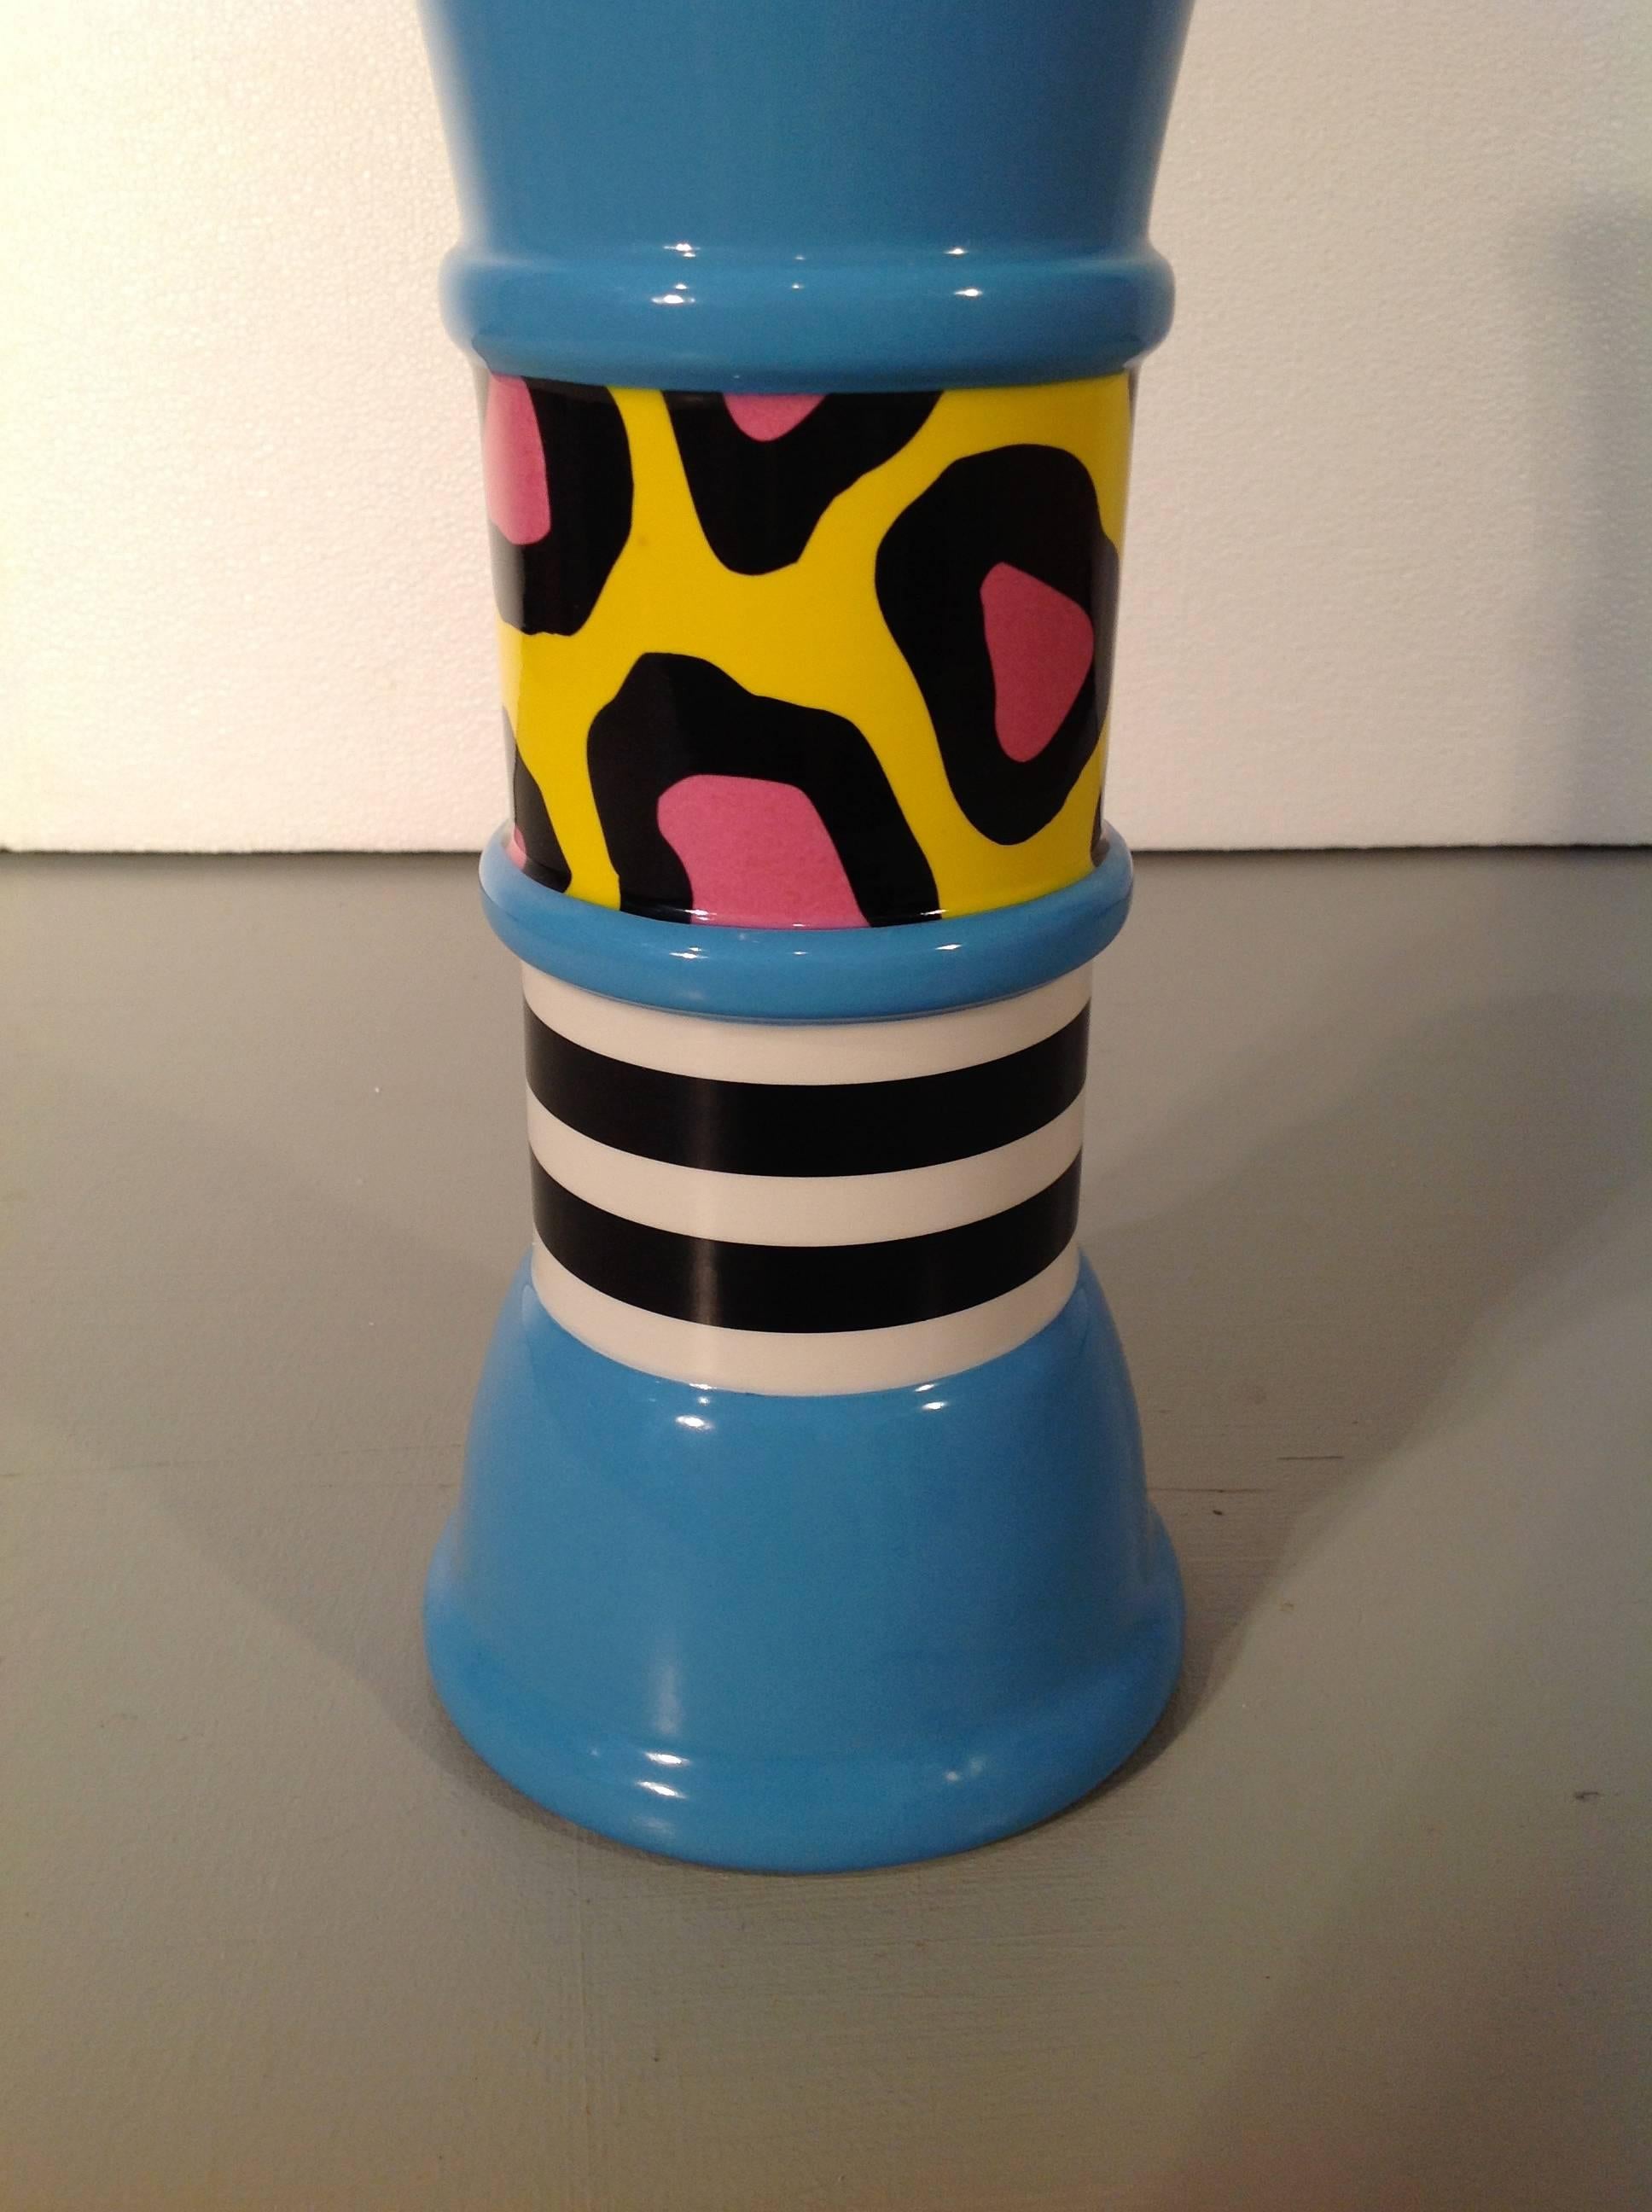 CARROT Ceramic Flower Vase by Nathalie Du Pasquier for MEMPHIS srl (1985)

An unequivocal example of the power of Nathalie's understand of pattern & visual imagery.  As the principal pattern designer for MEMPHIS products in the early 1980's, she